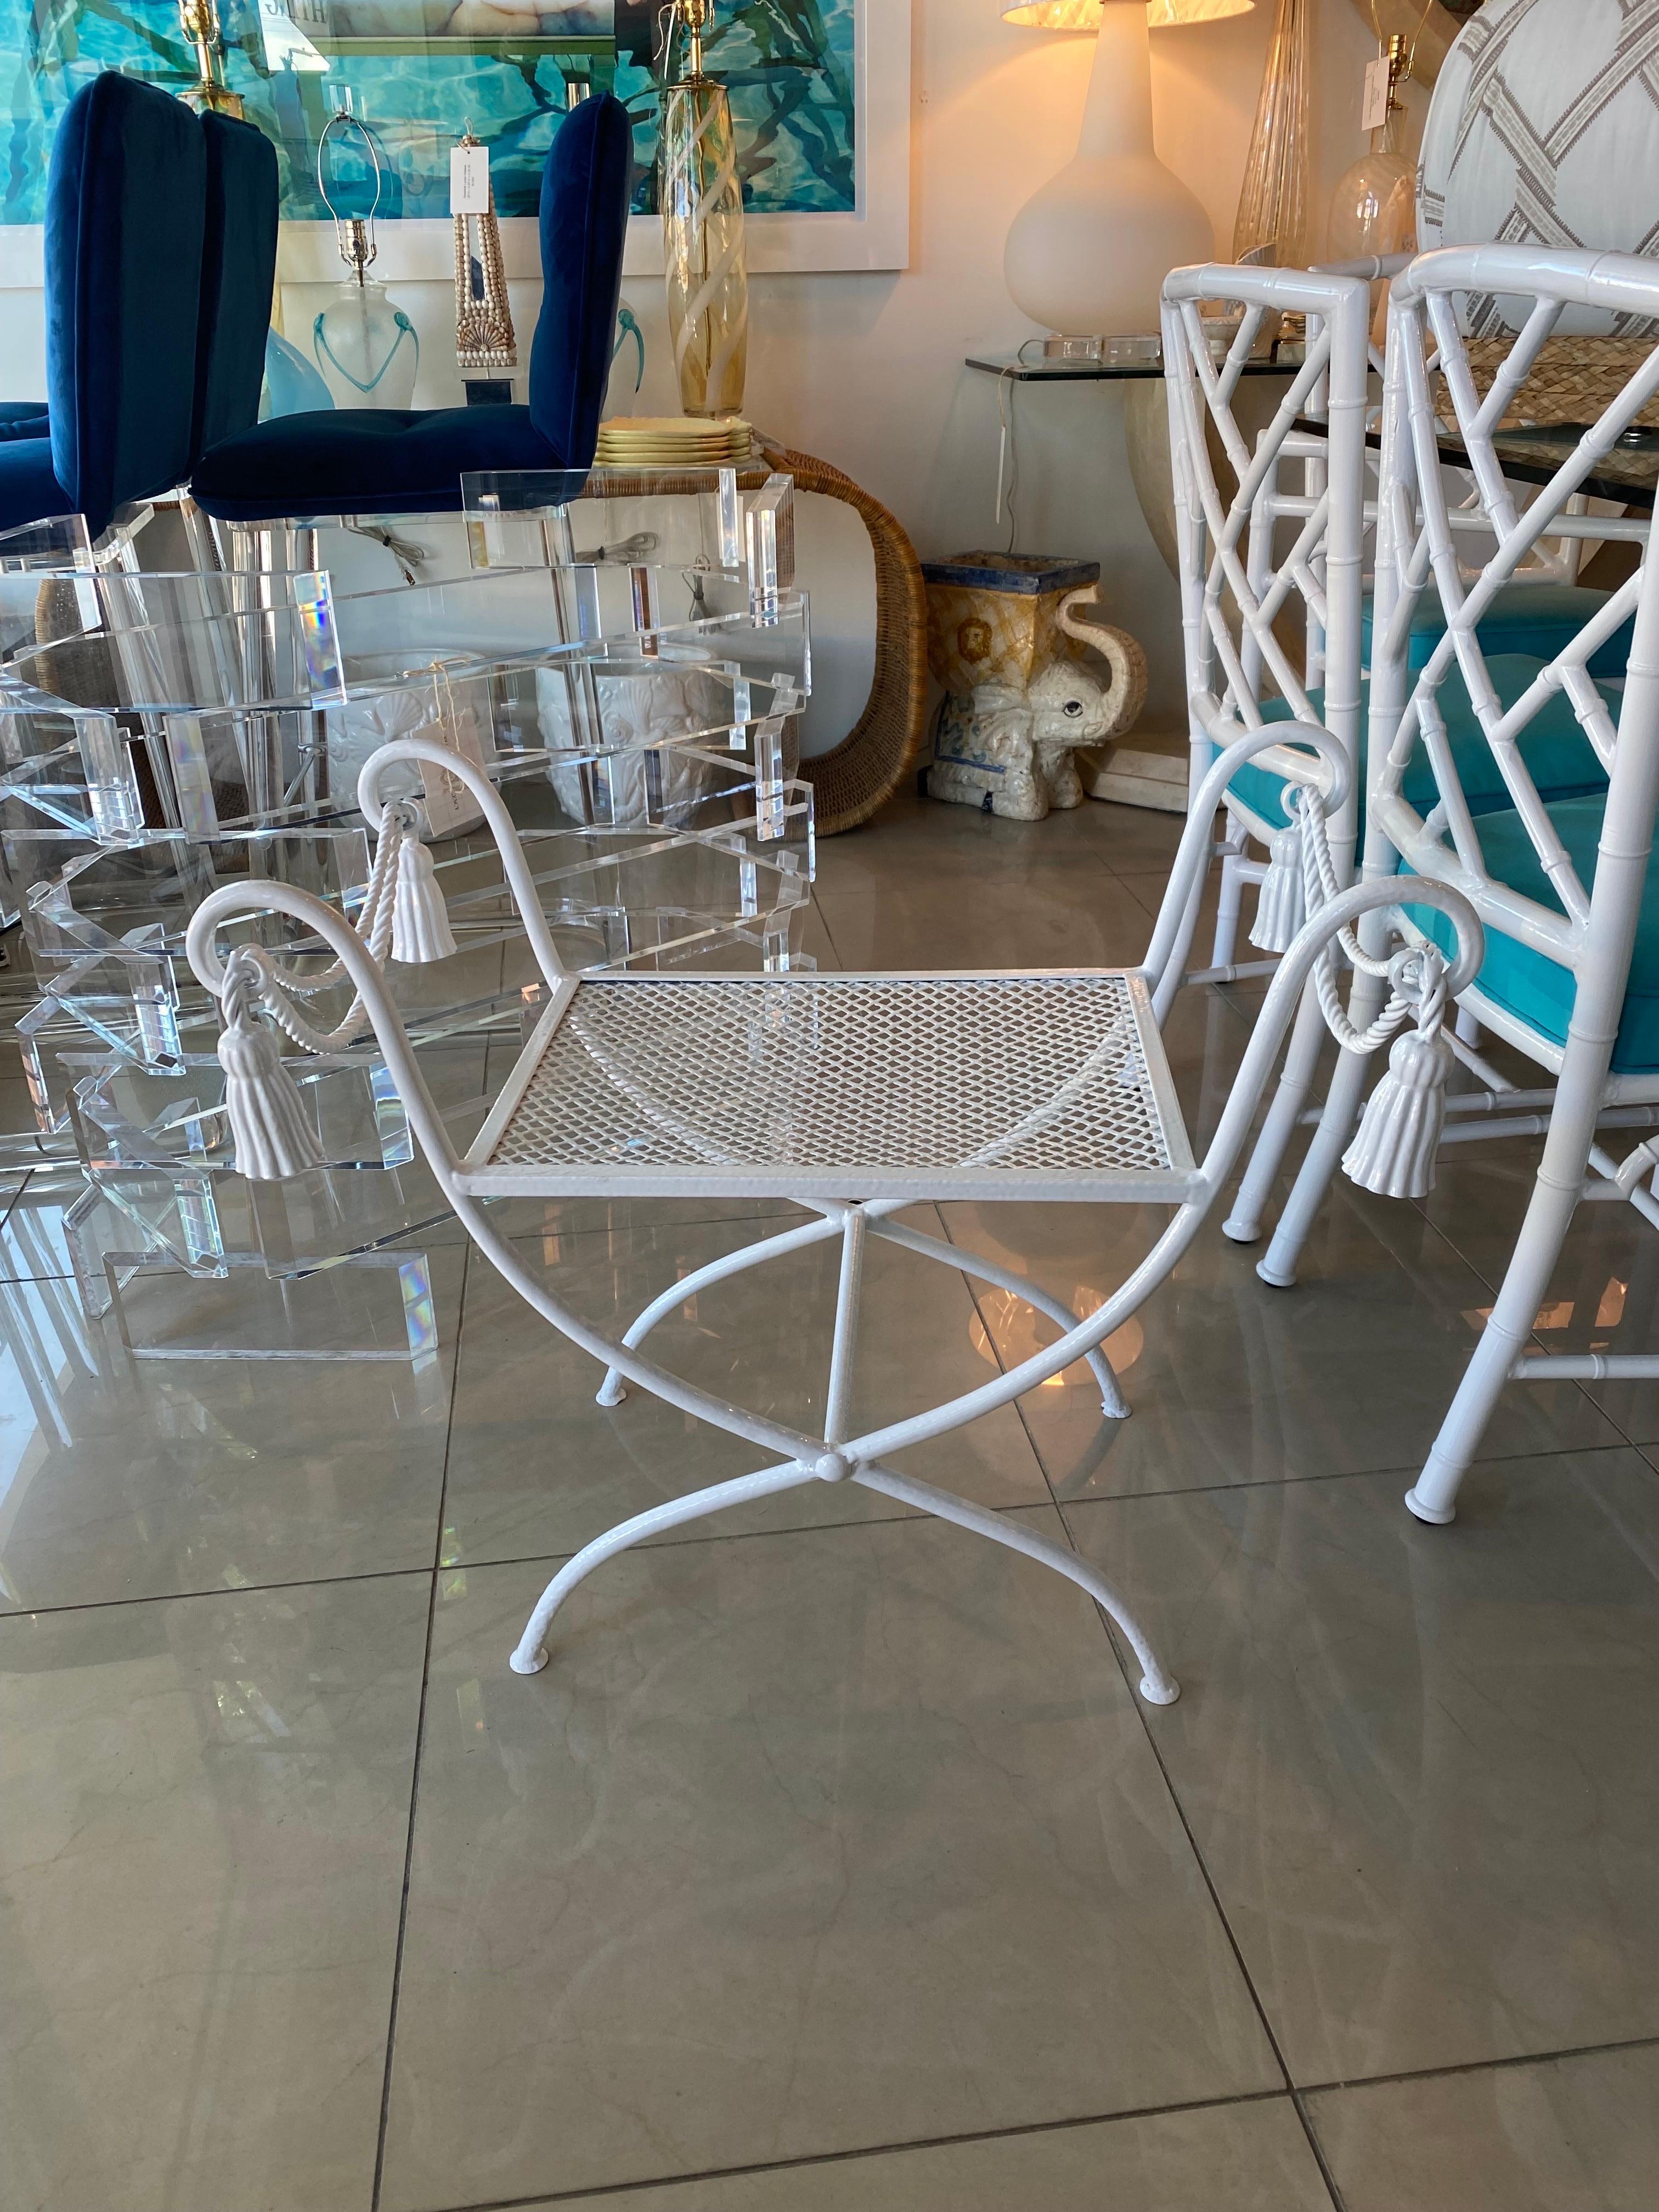 Vintage Italian Metal Tassle Bench Stools Newly Powder-Coated Patio Outdoor In Good Condition For Sale In West Palm Beach, FL